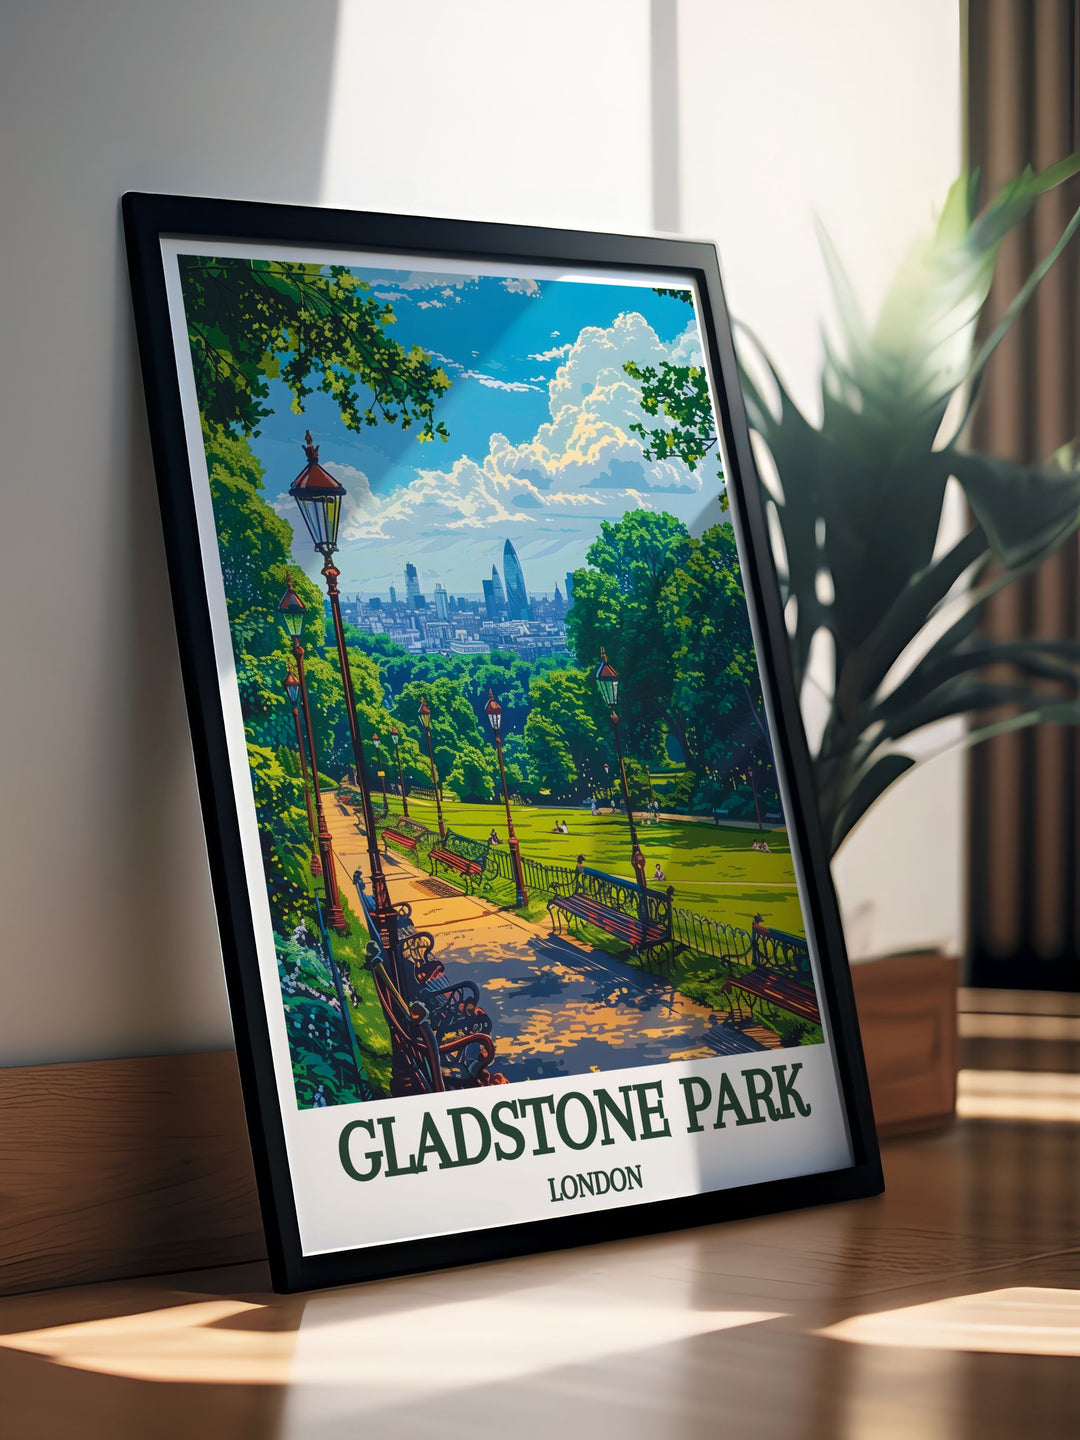 Custom print of Gladstone Park, showcasing the parks serene beauty and historic charm, perfect for those who appreciate the tranquility and scenic landscapes of Londons green spaces.